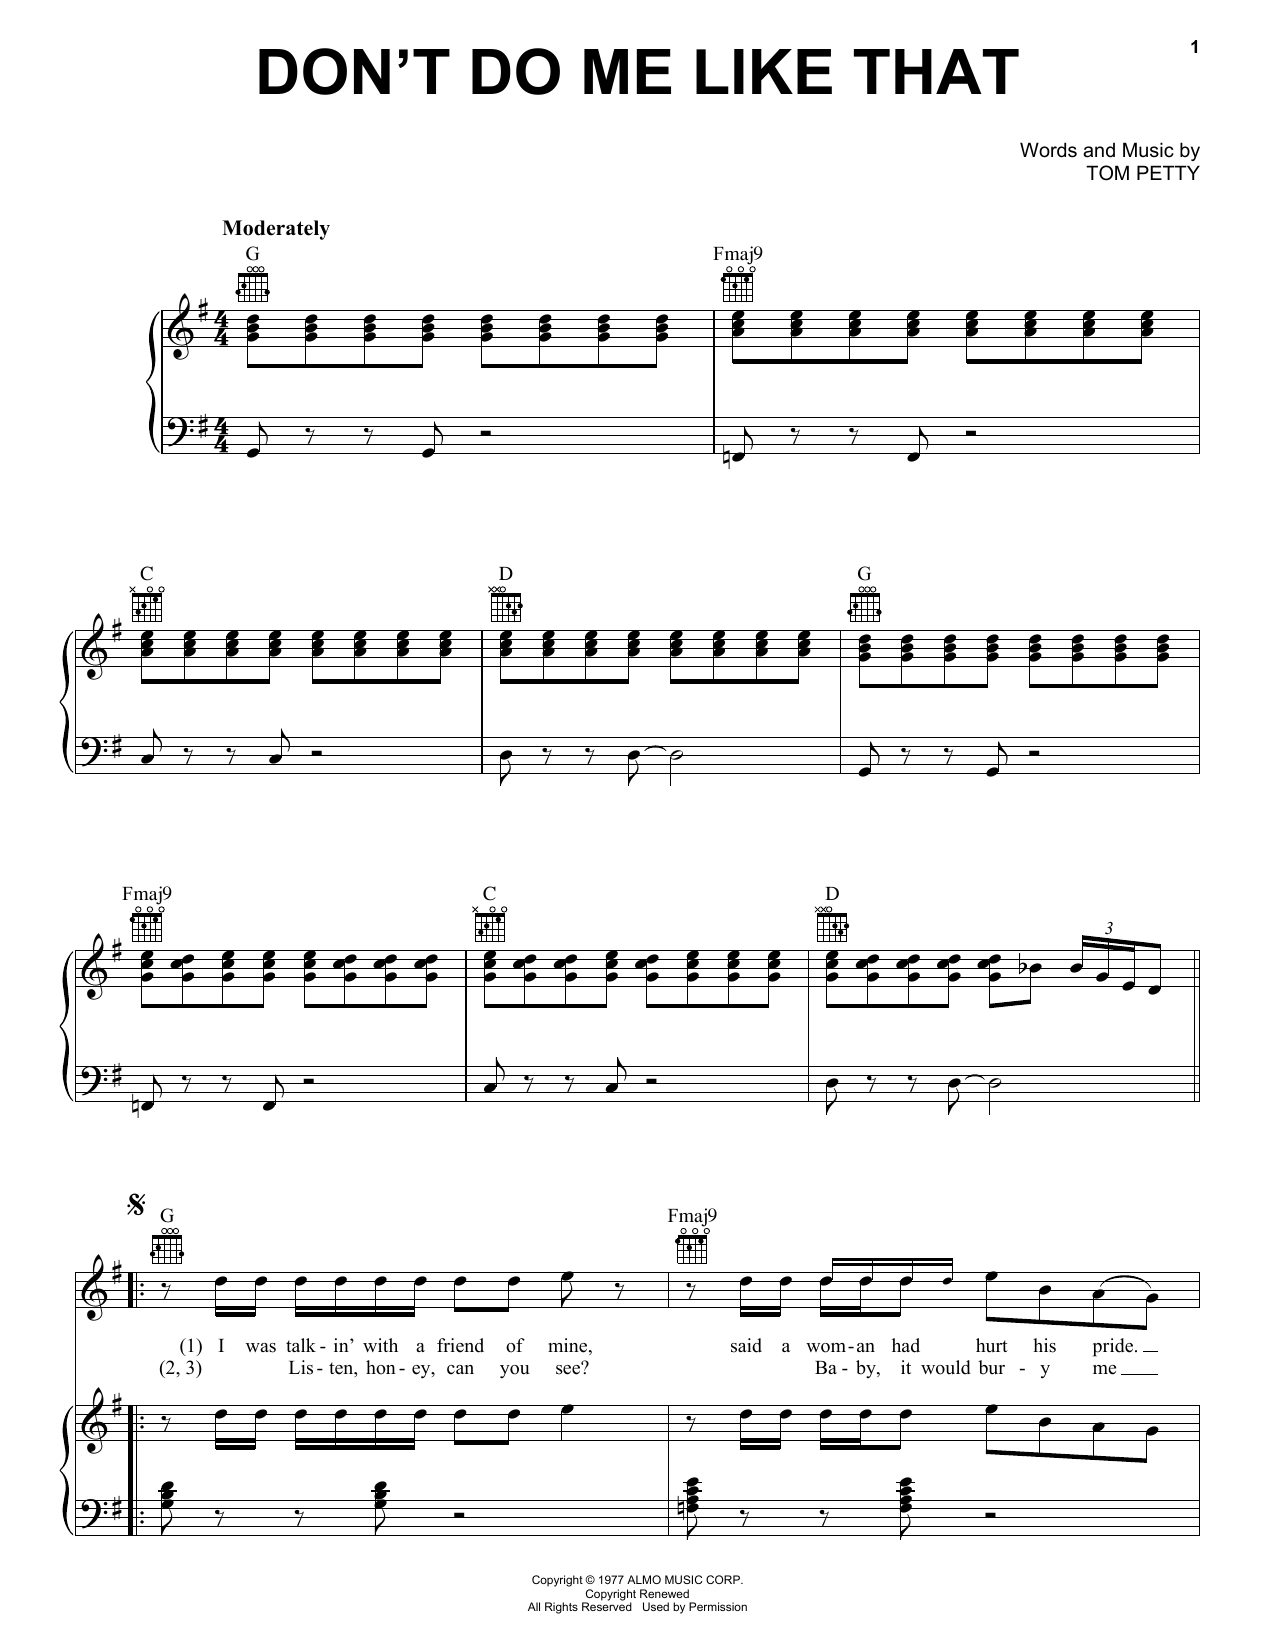 Tom Petty And The Heartbreakers Don't Do Me Like That sheet music notes and chords. Download Printable PDF.